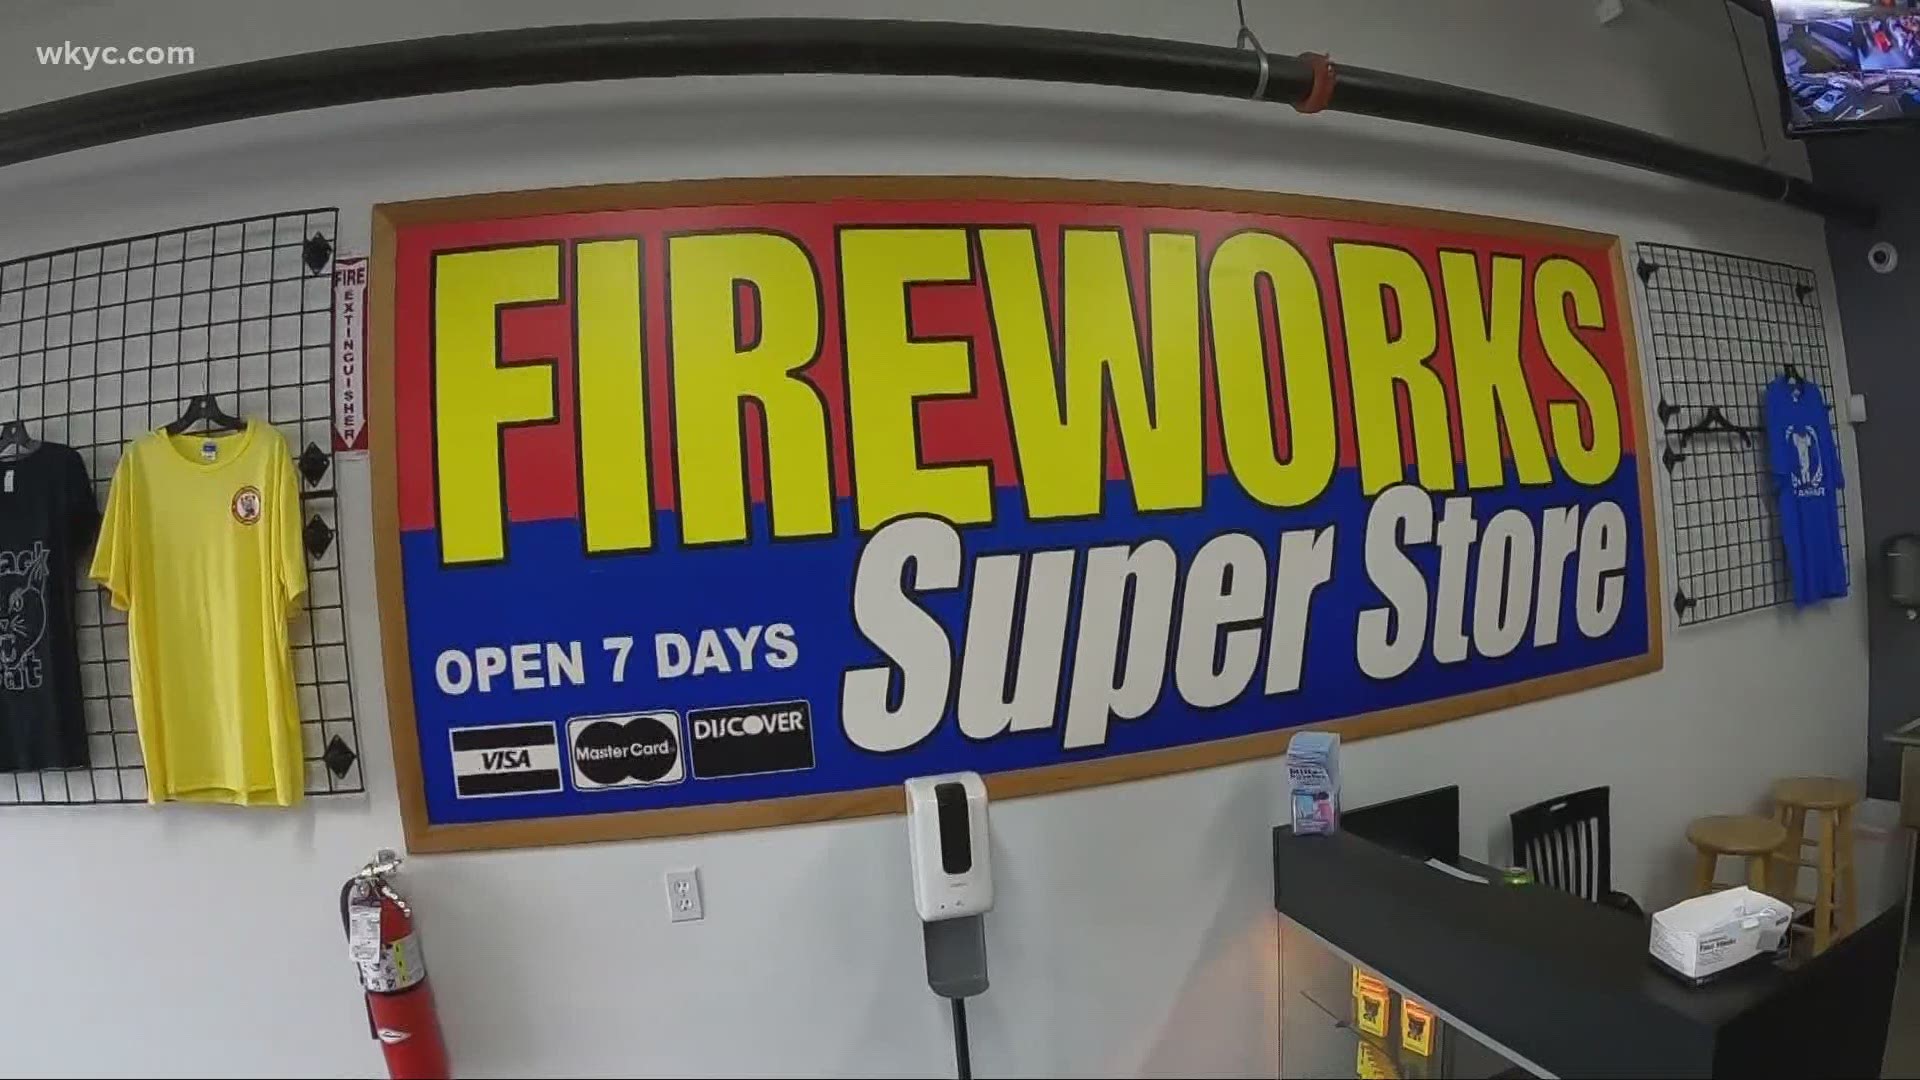 There is a fireworks shortage and a bill recently passed in the Ohio Senate that could change the way we celebrate.